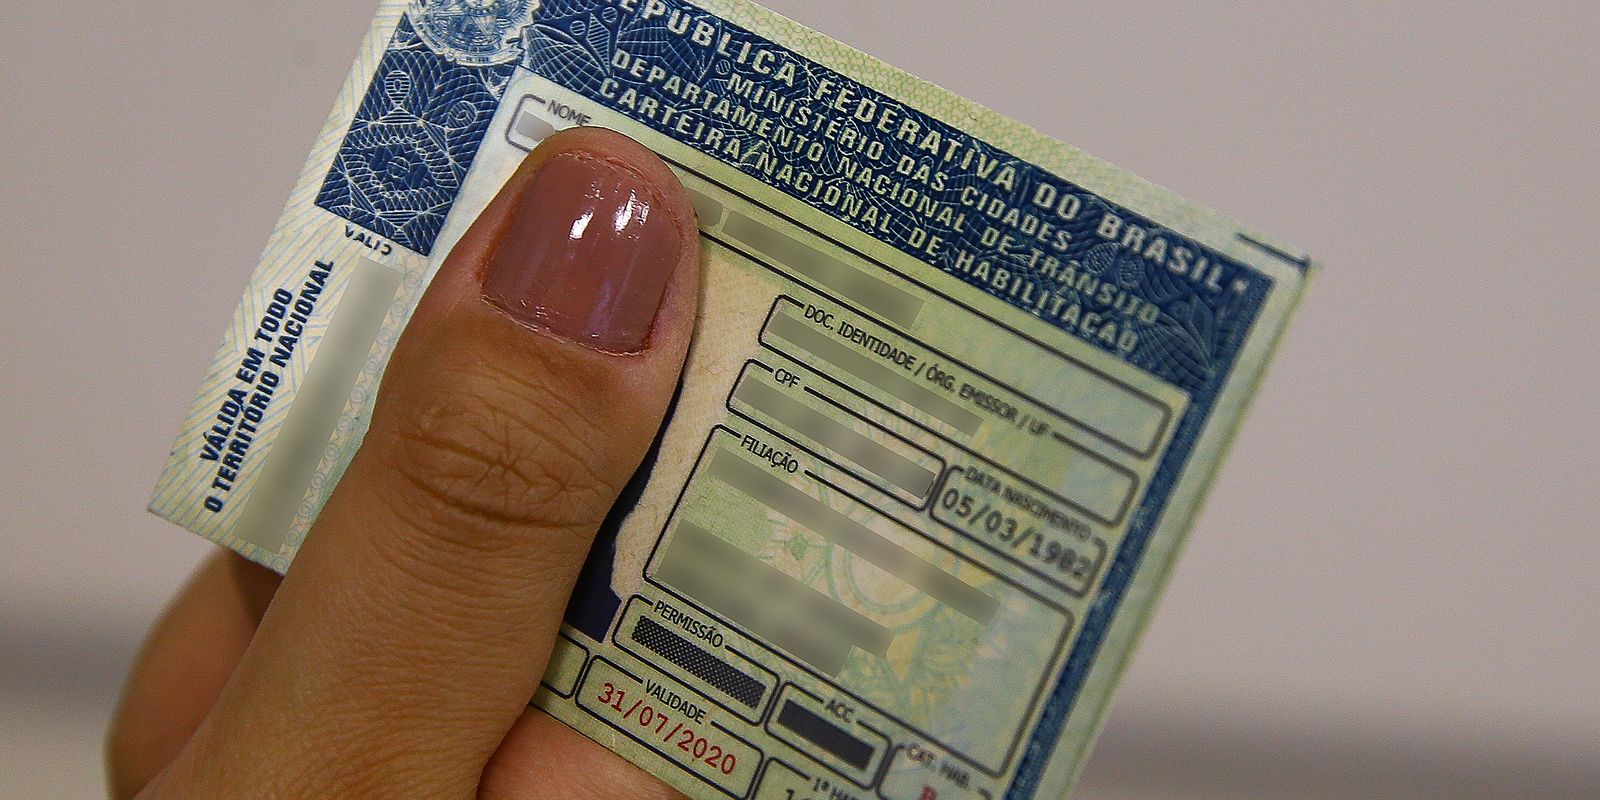 Poupatempo makes joint effort to renew driver’s license in São Paulo
– News X